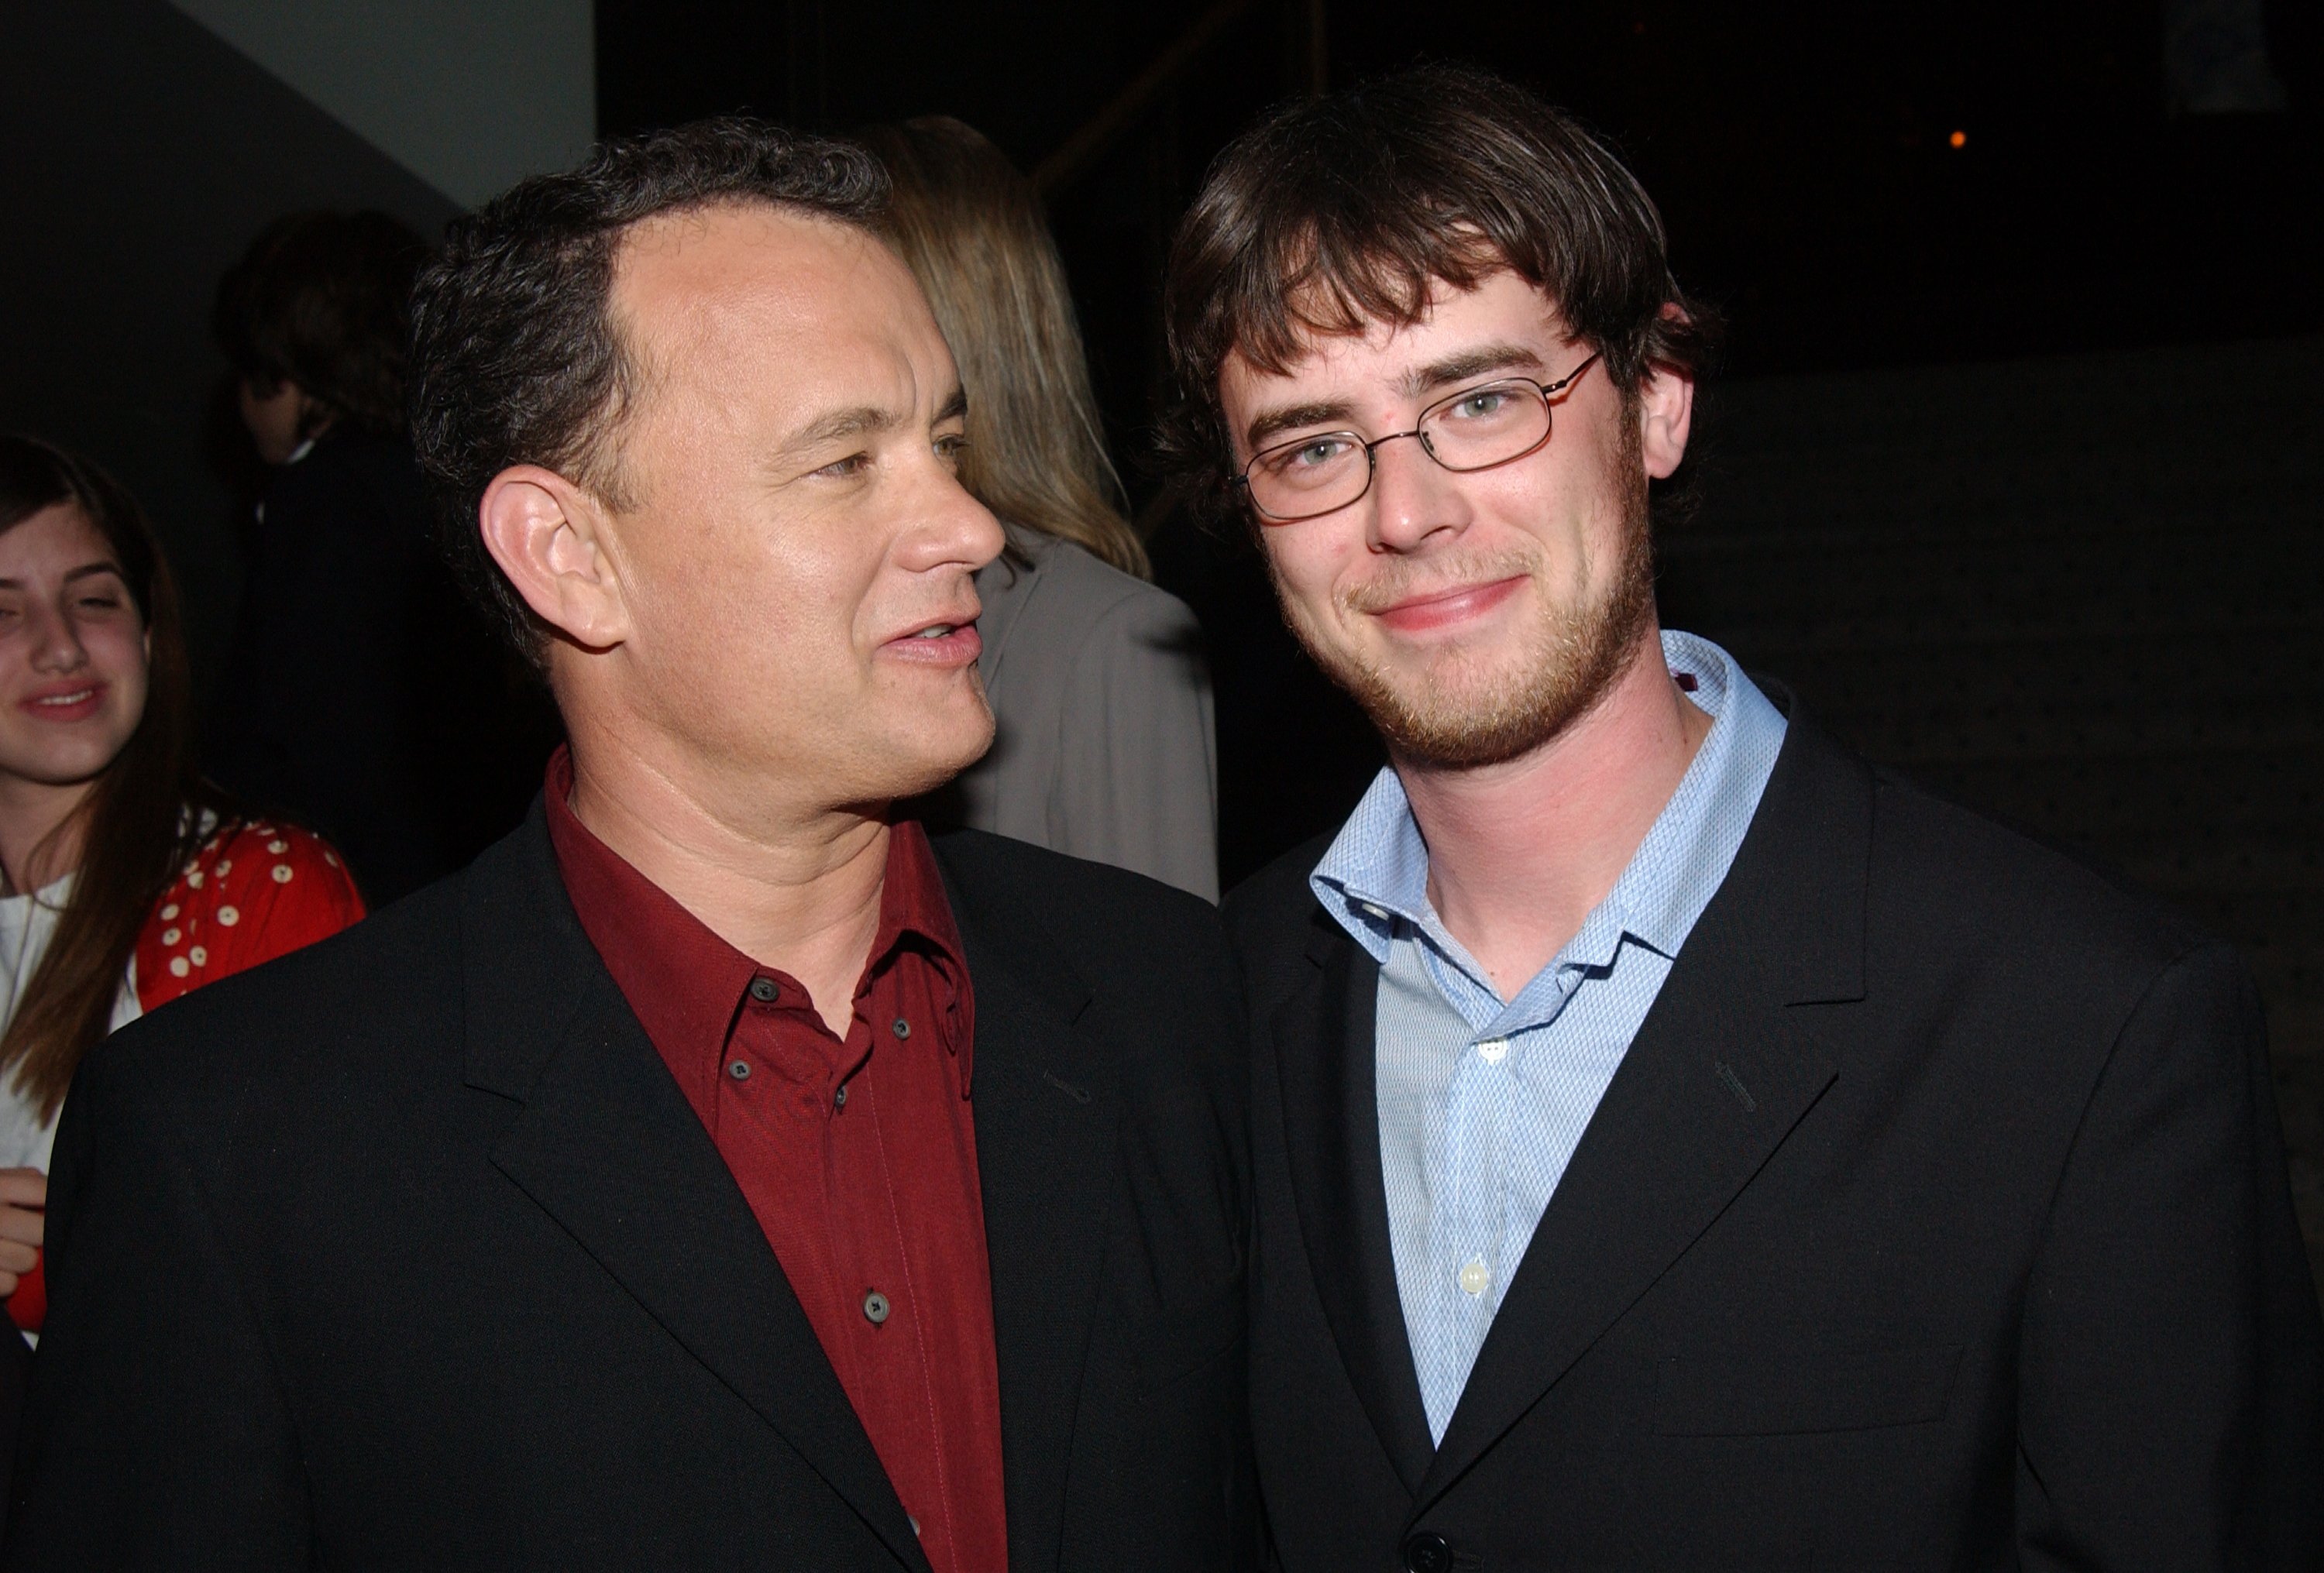 Tom Hanks and son Colin Hanks in Beverly Hills, California, United States | Source: Getty Images